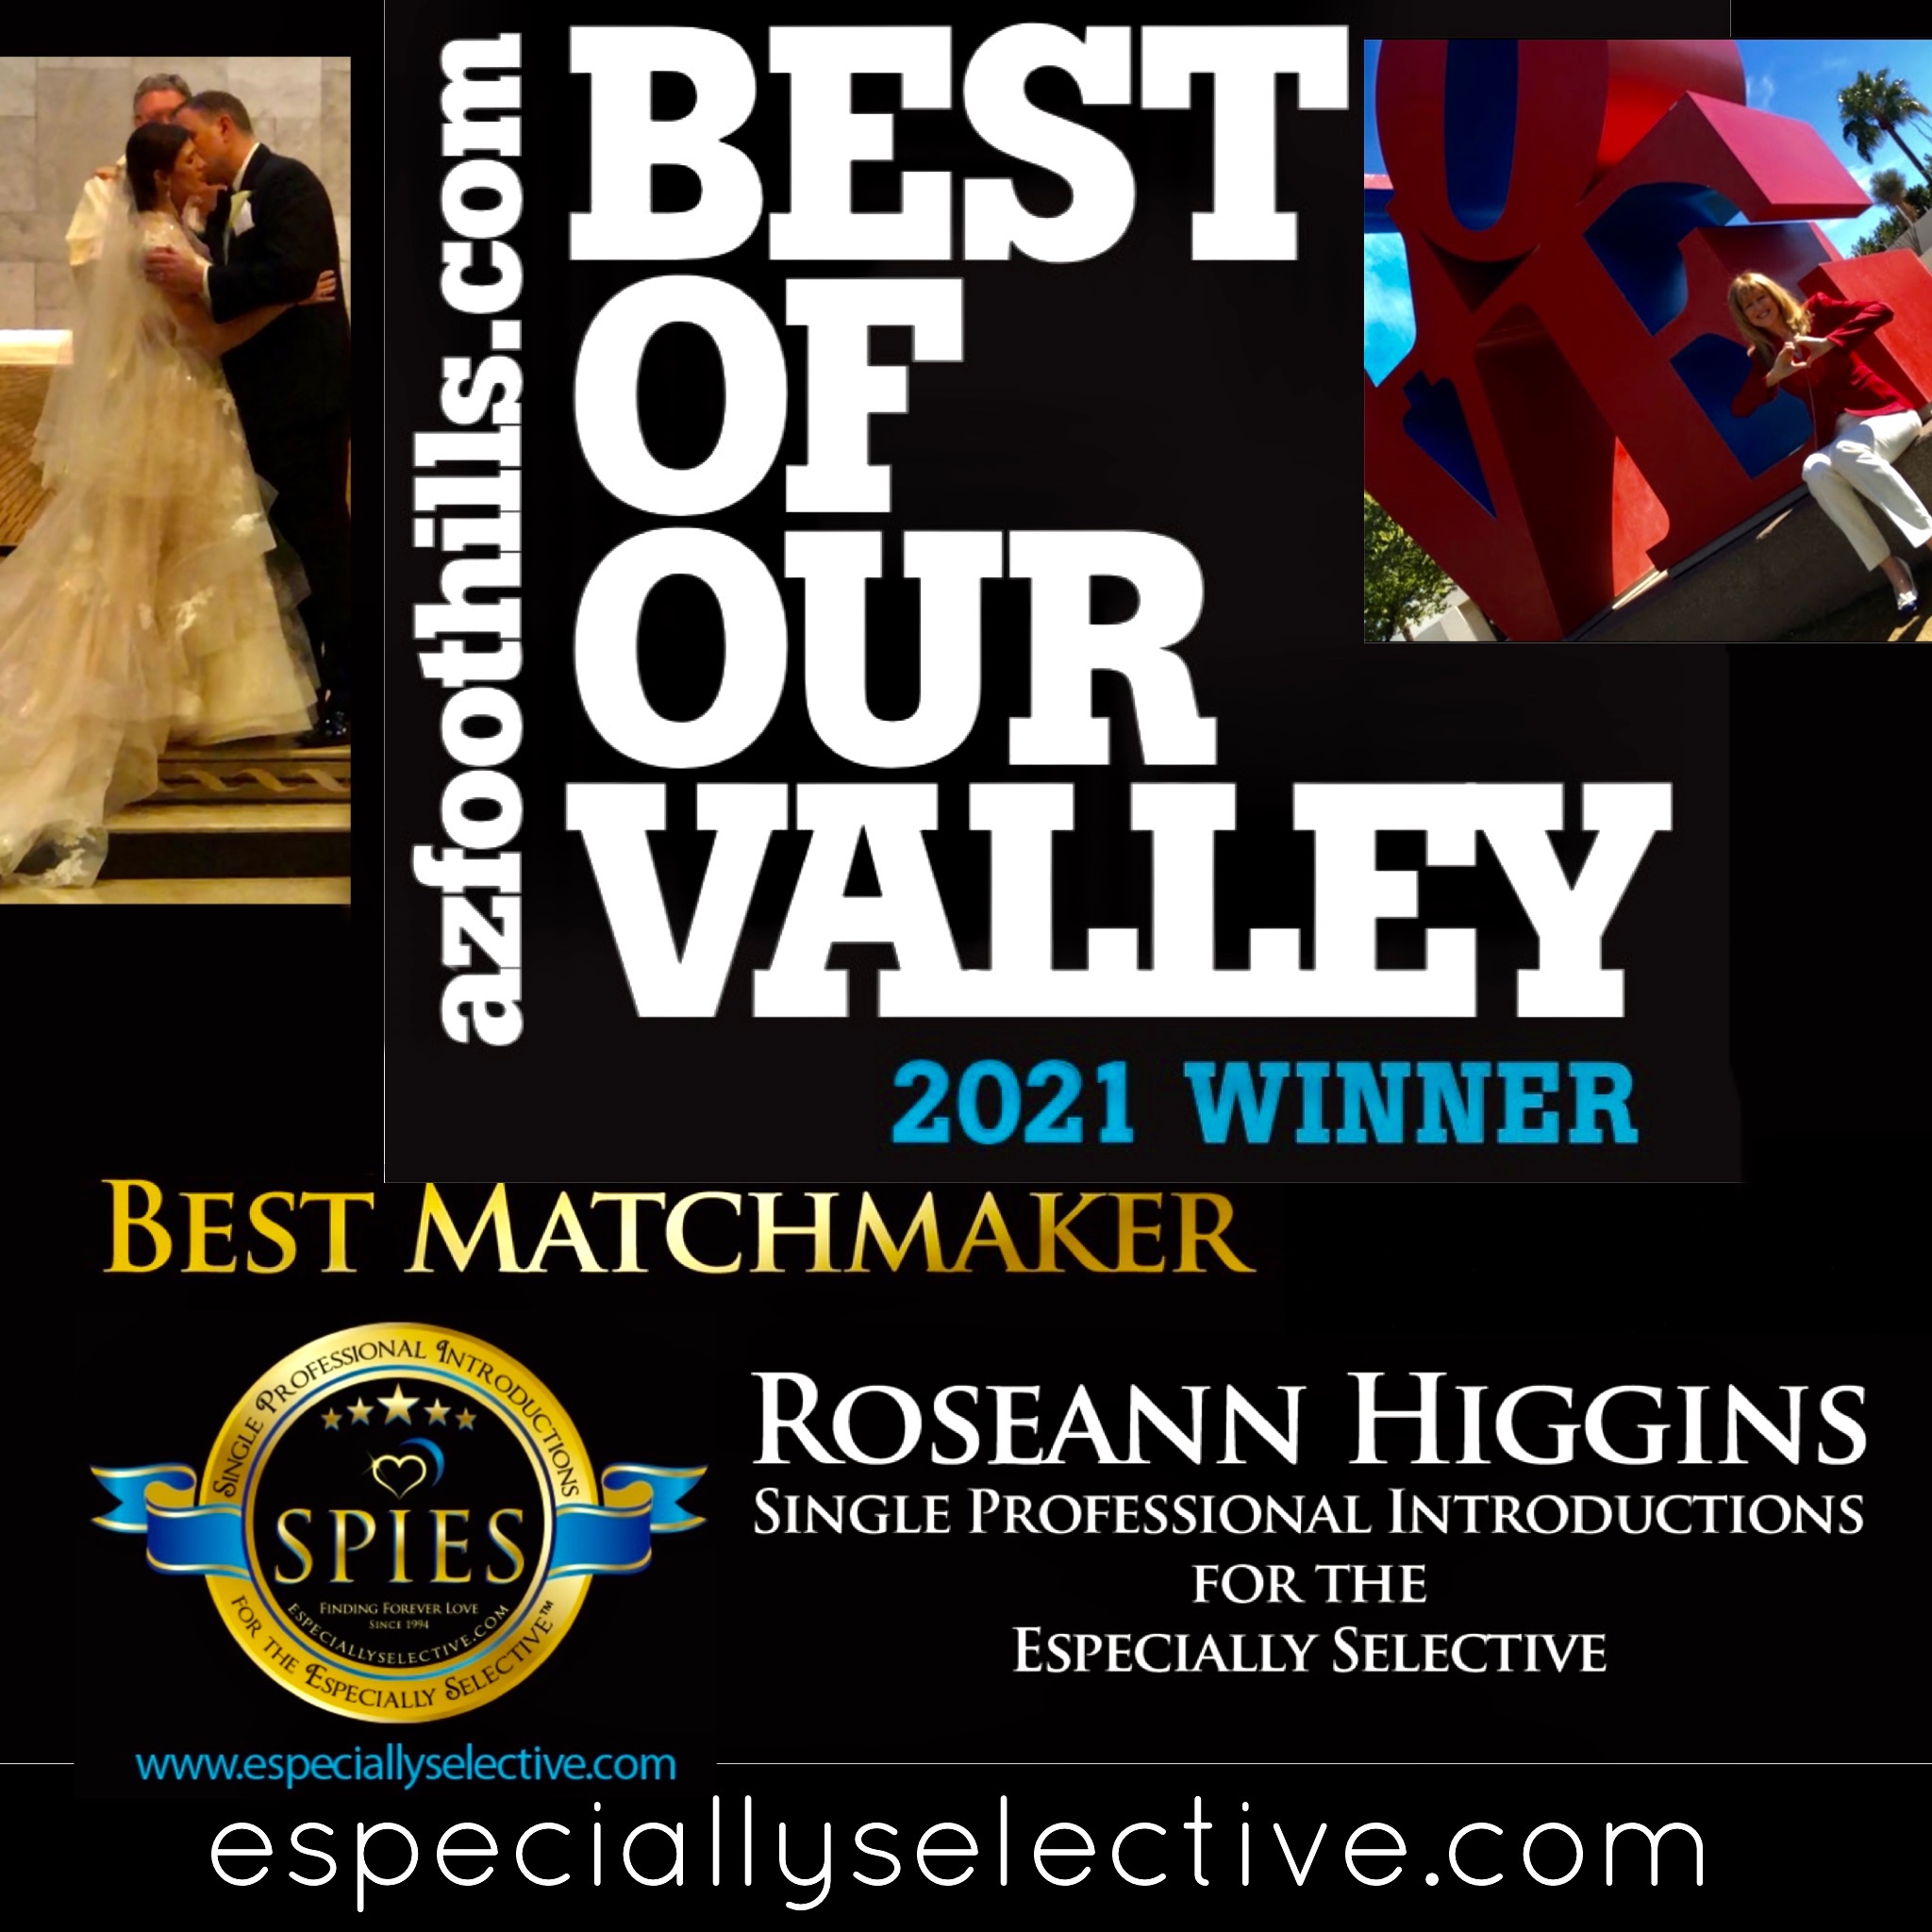 Roseann Higgins, elite, matchmaker, Phoenix, Scottsdale, Arizona, matchmaking, matchmaking service, azfoothills, best of our valley, bestofourvalley, award winning, SPIES, singles, most eligible, bachelor, especially selective, relationships, dating, entrepreneur, romance, headhunter, recruiter, love, fall in love, soulmate